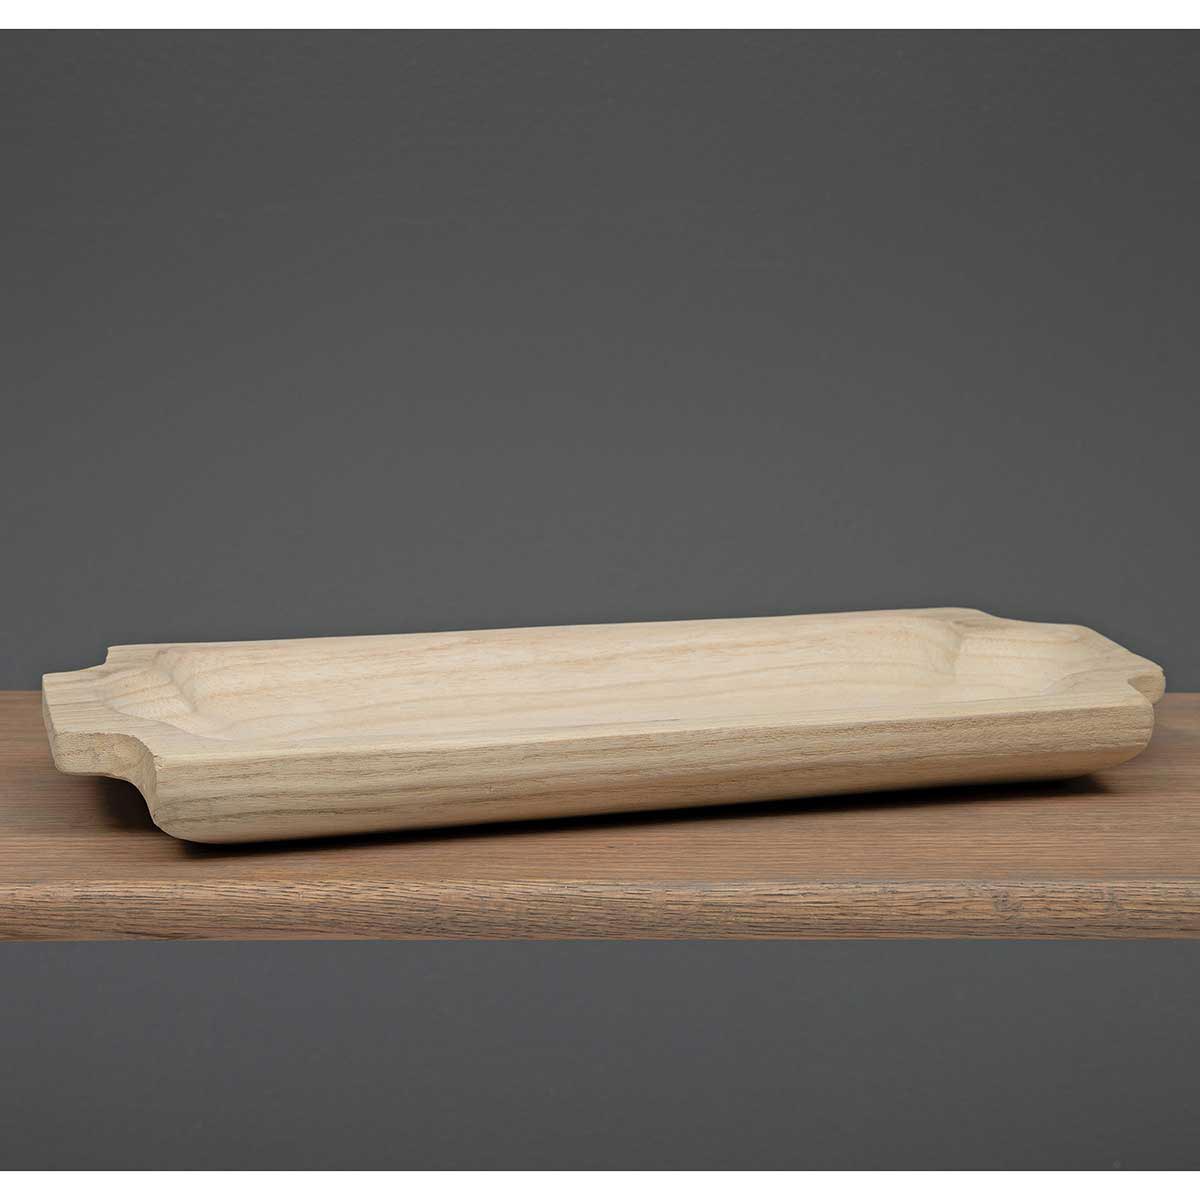 WOOD RECTANGLE TRAY NATURAL WITH HANDLES 16.5"